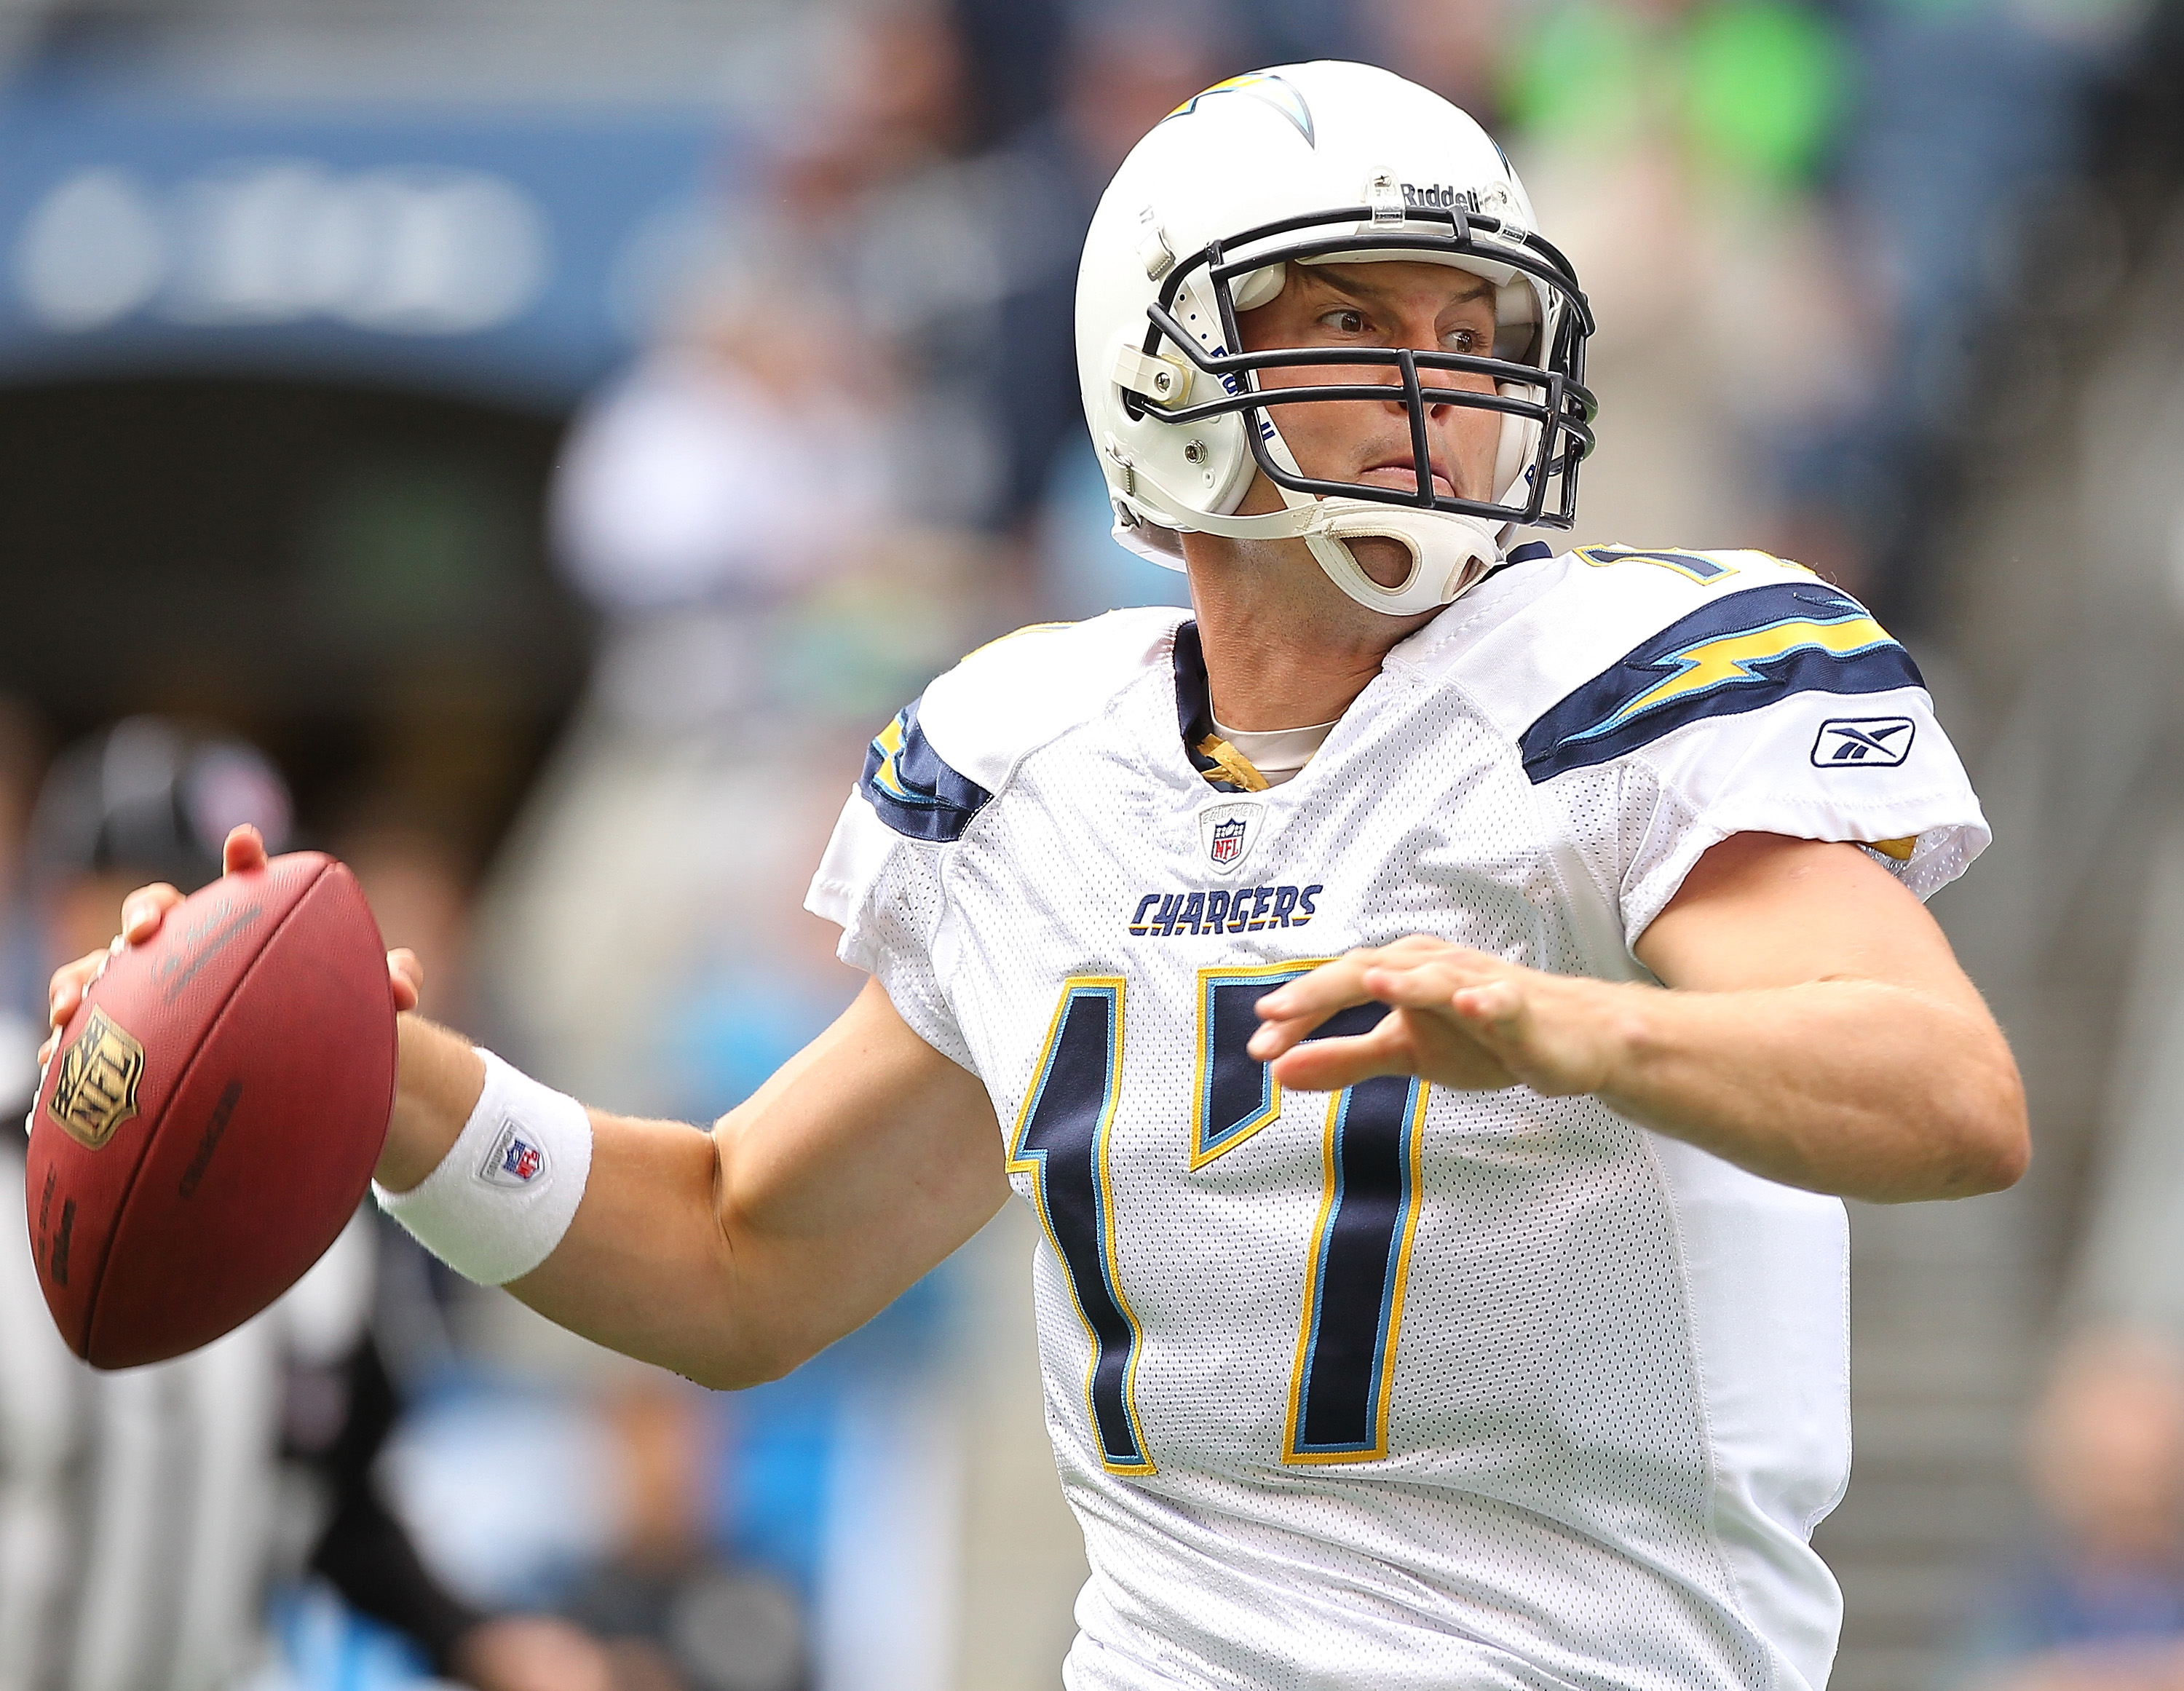 SEATTLE - SEPTEMBER 26:  Quarterback Philip Rivers #17 of the San Diego Chargers passes against the Seattle Seahawks at Qwest Field on September 26, 2010 in Seattle, Washington. The Seahawks defeated the Chargers 27-20. (Photo by Otto Greule Jr/Getty Imag